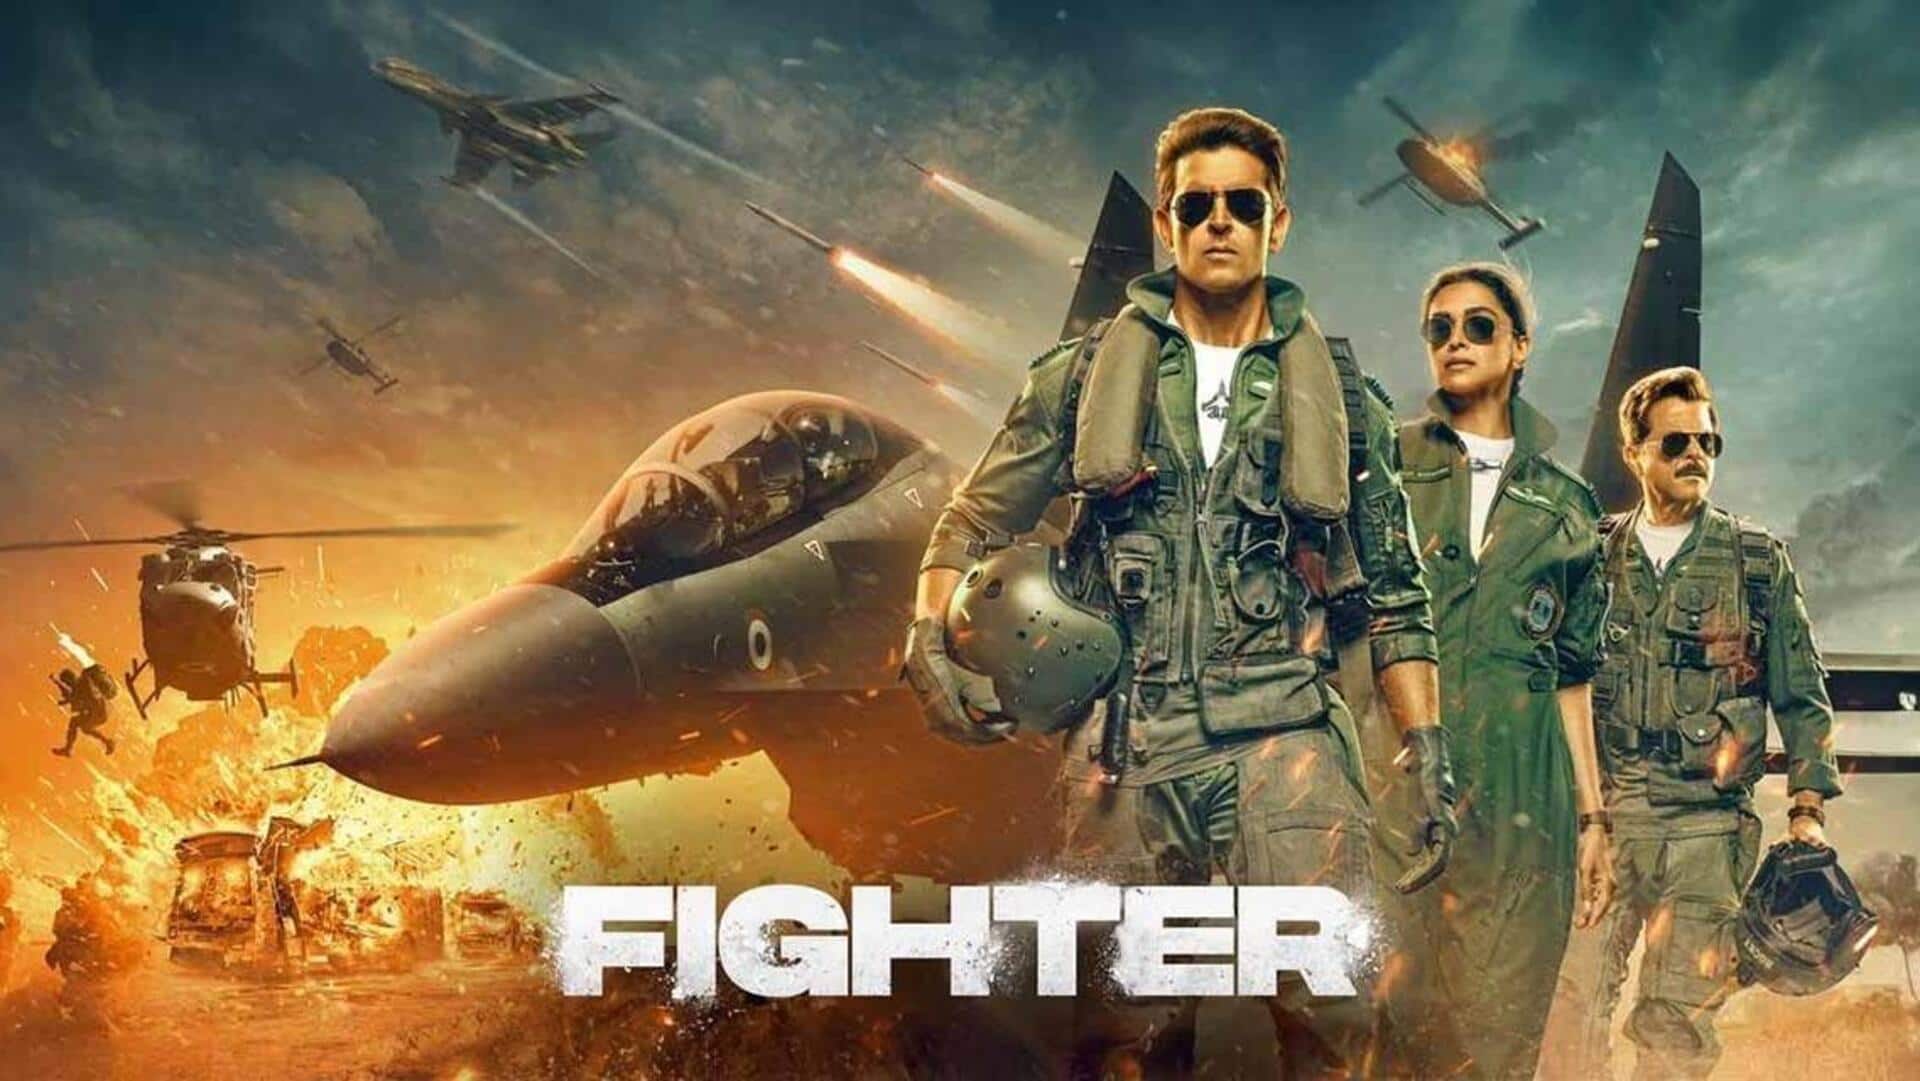 Box office buzz: 'Fighter' rakes in Rs. 3.7 crore